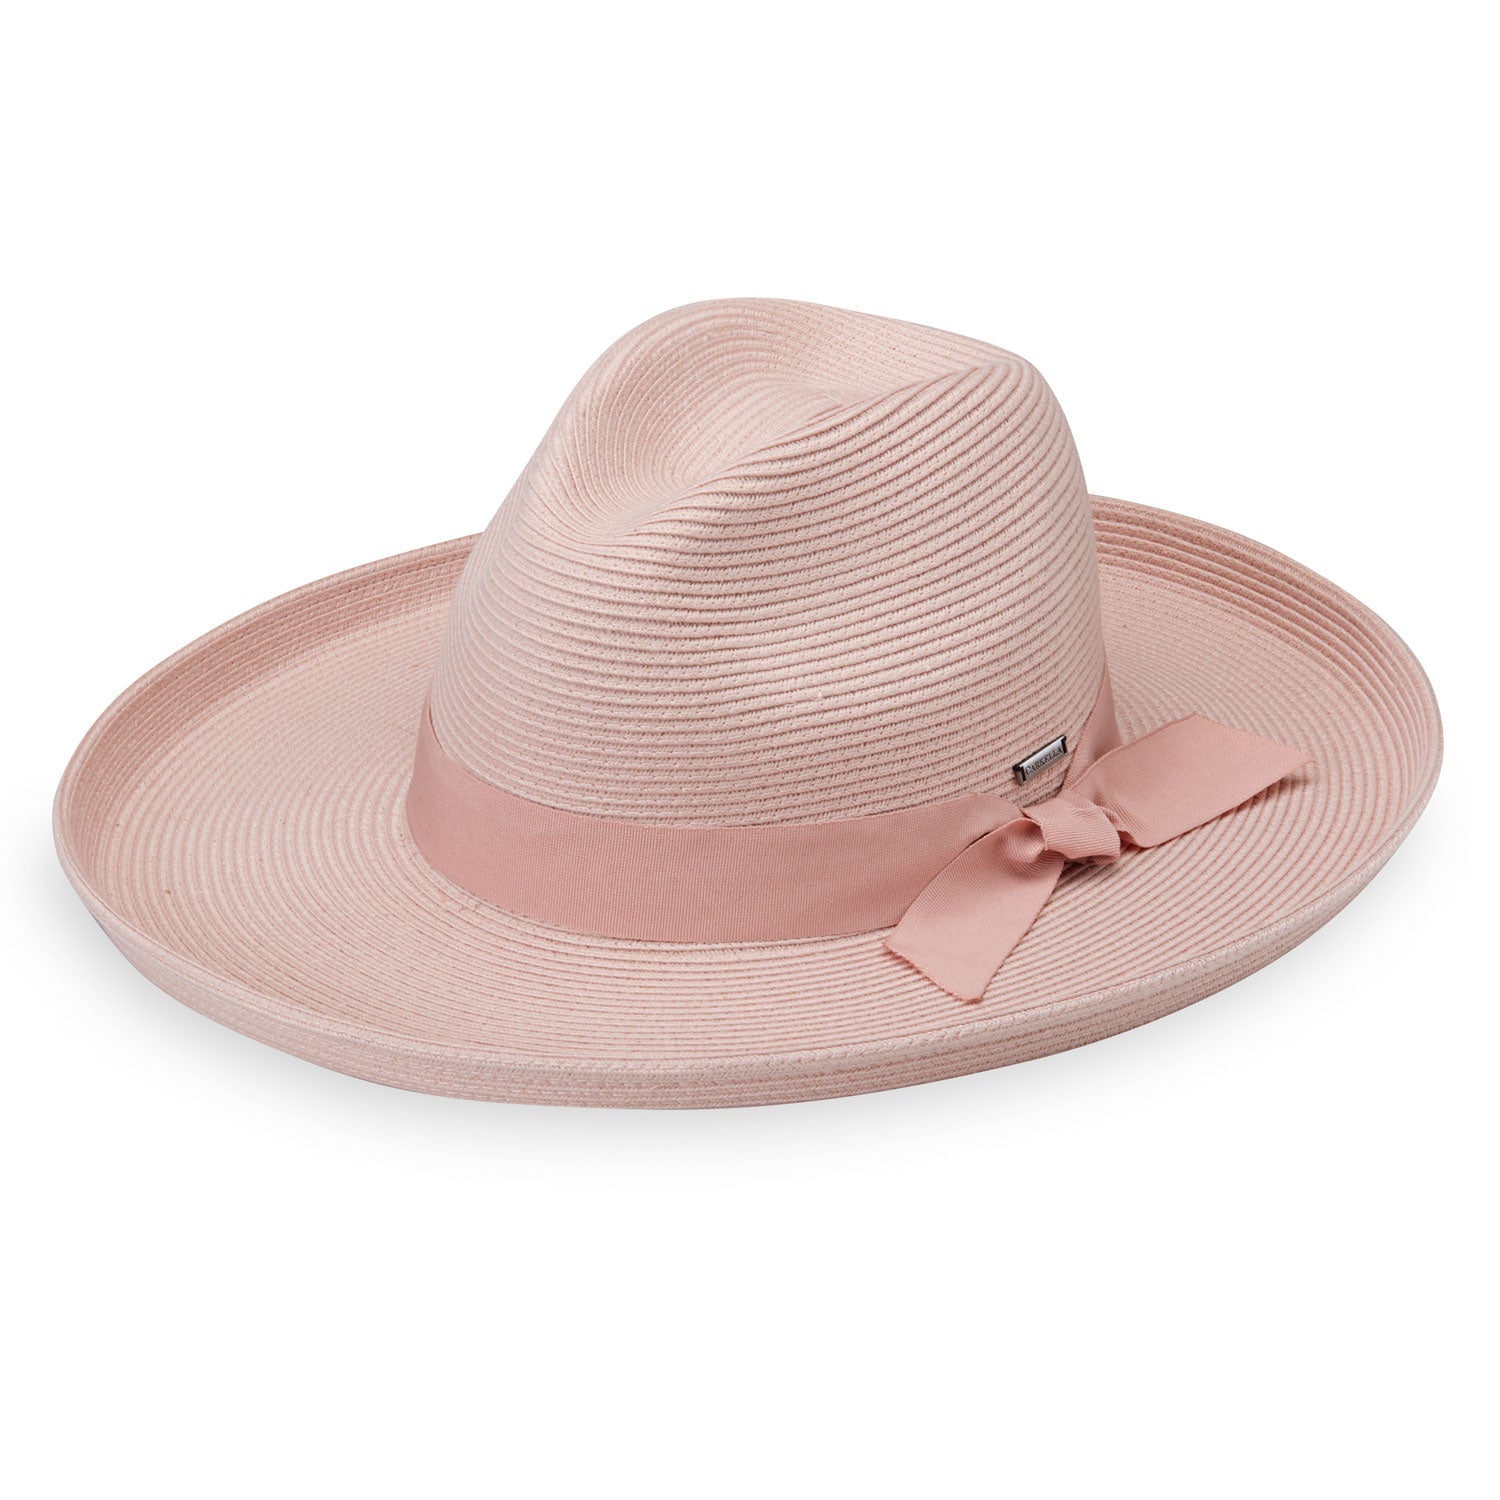 Featuring Front of Wide Brim Fedora Style Vivian UPF Sun Hat in Dusty Rose from Carkella by Wallaroo